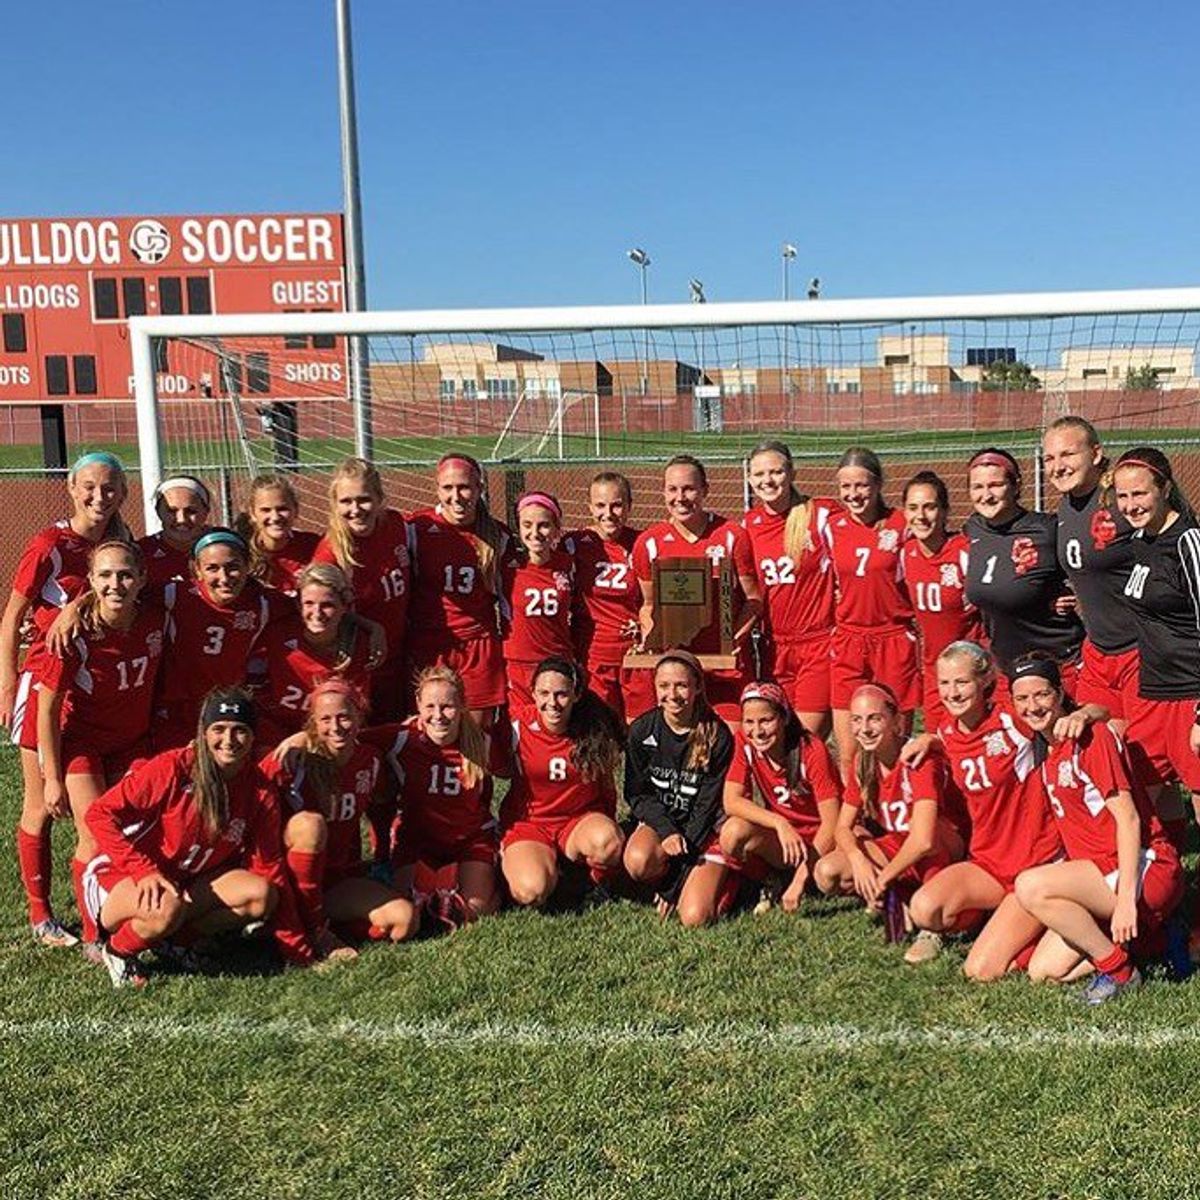 6 Things I've Gained From A High School Soccer Experience